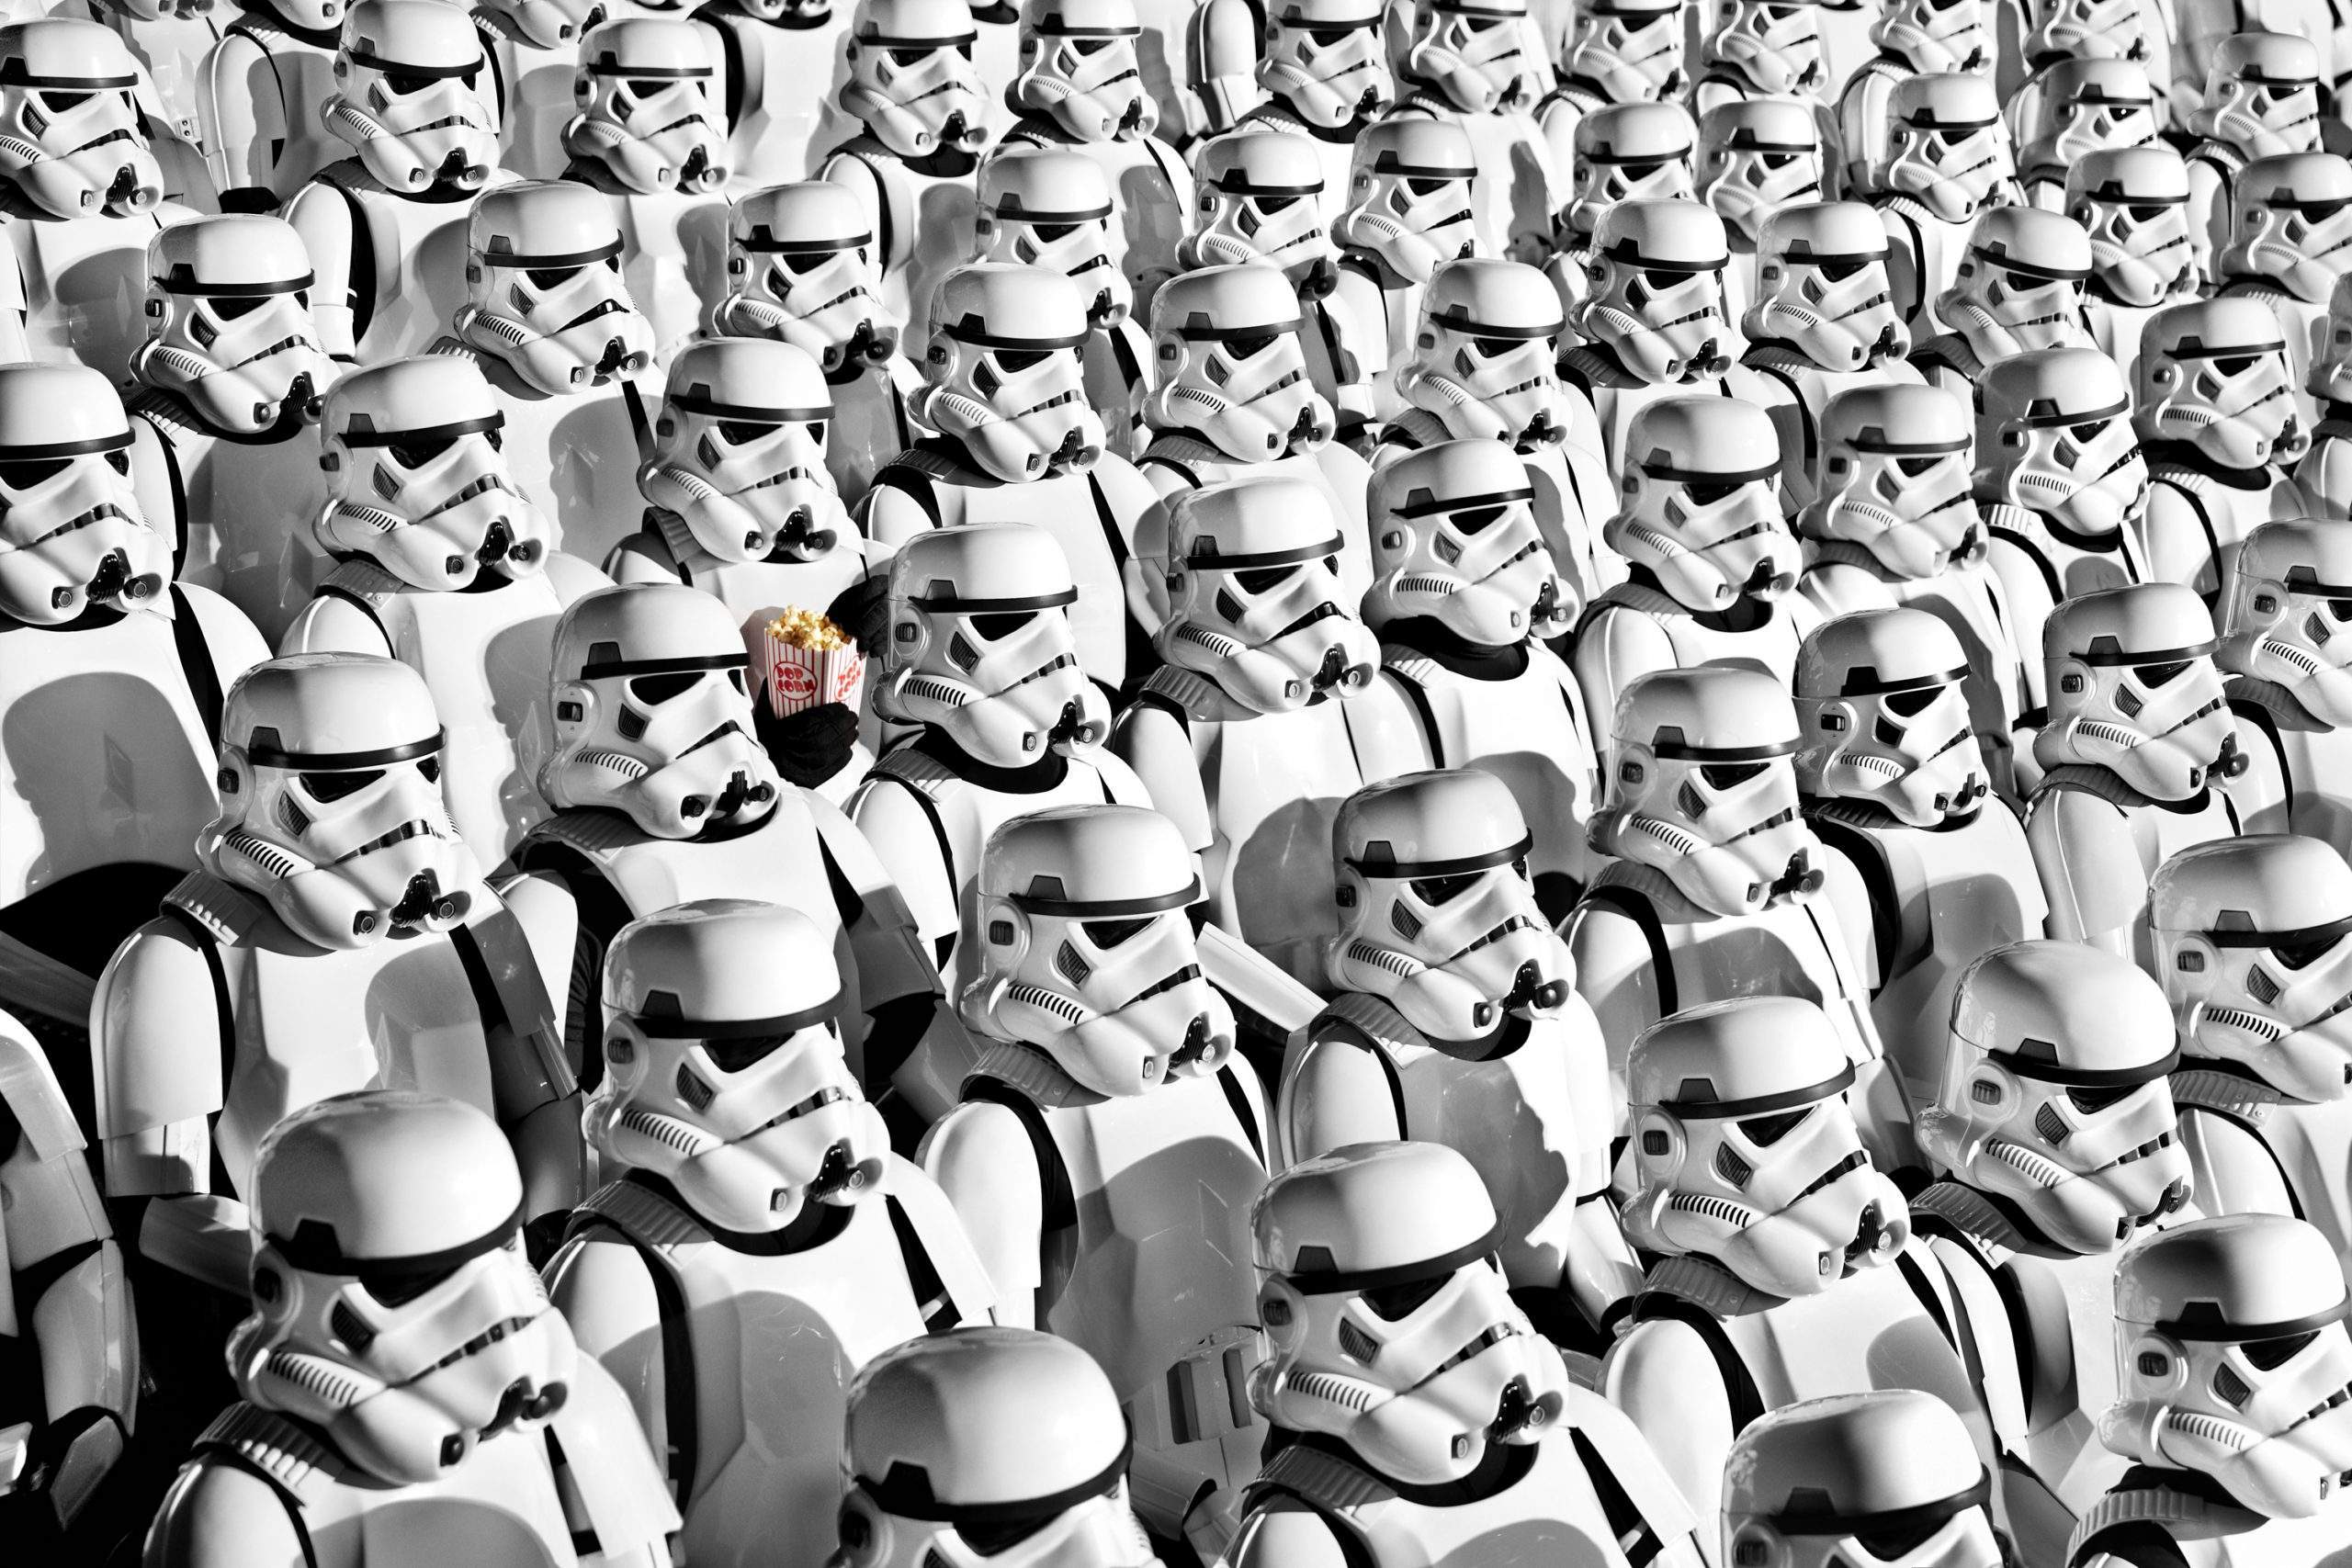 Featured image for post Art Streiber, Stormtroopers with Popcorn